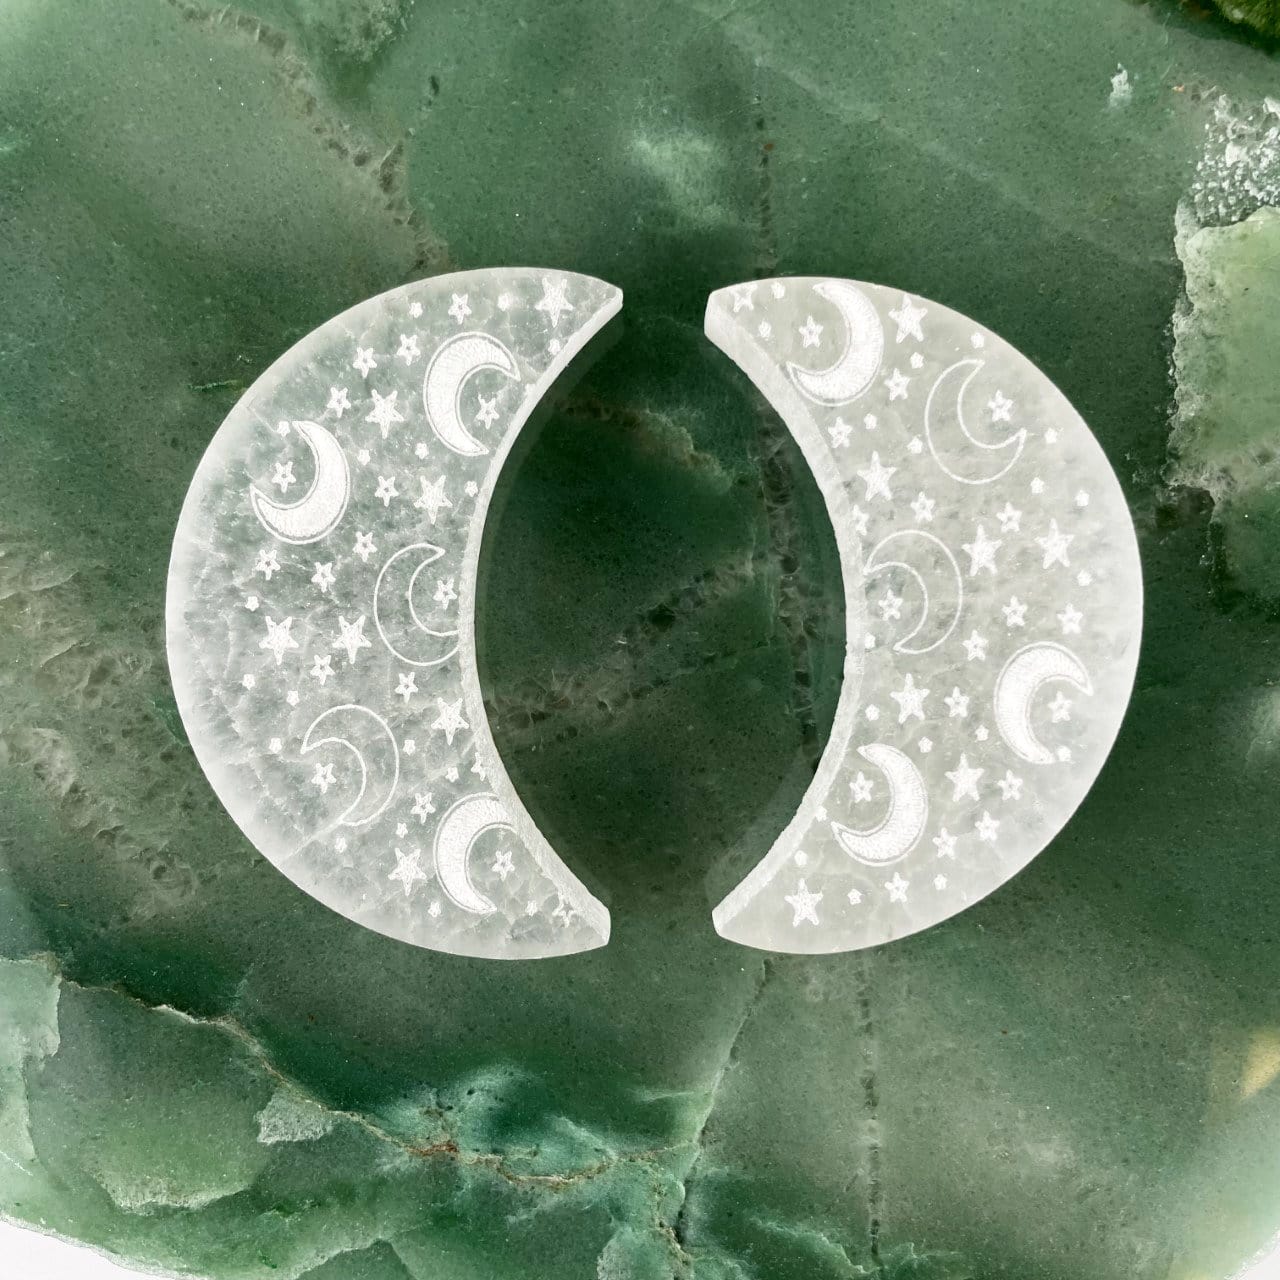 two selenite engraved crescent moon charging plates on display for engraving variations